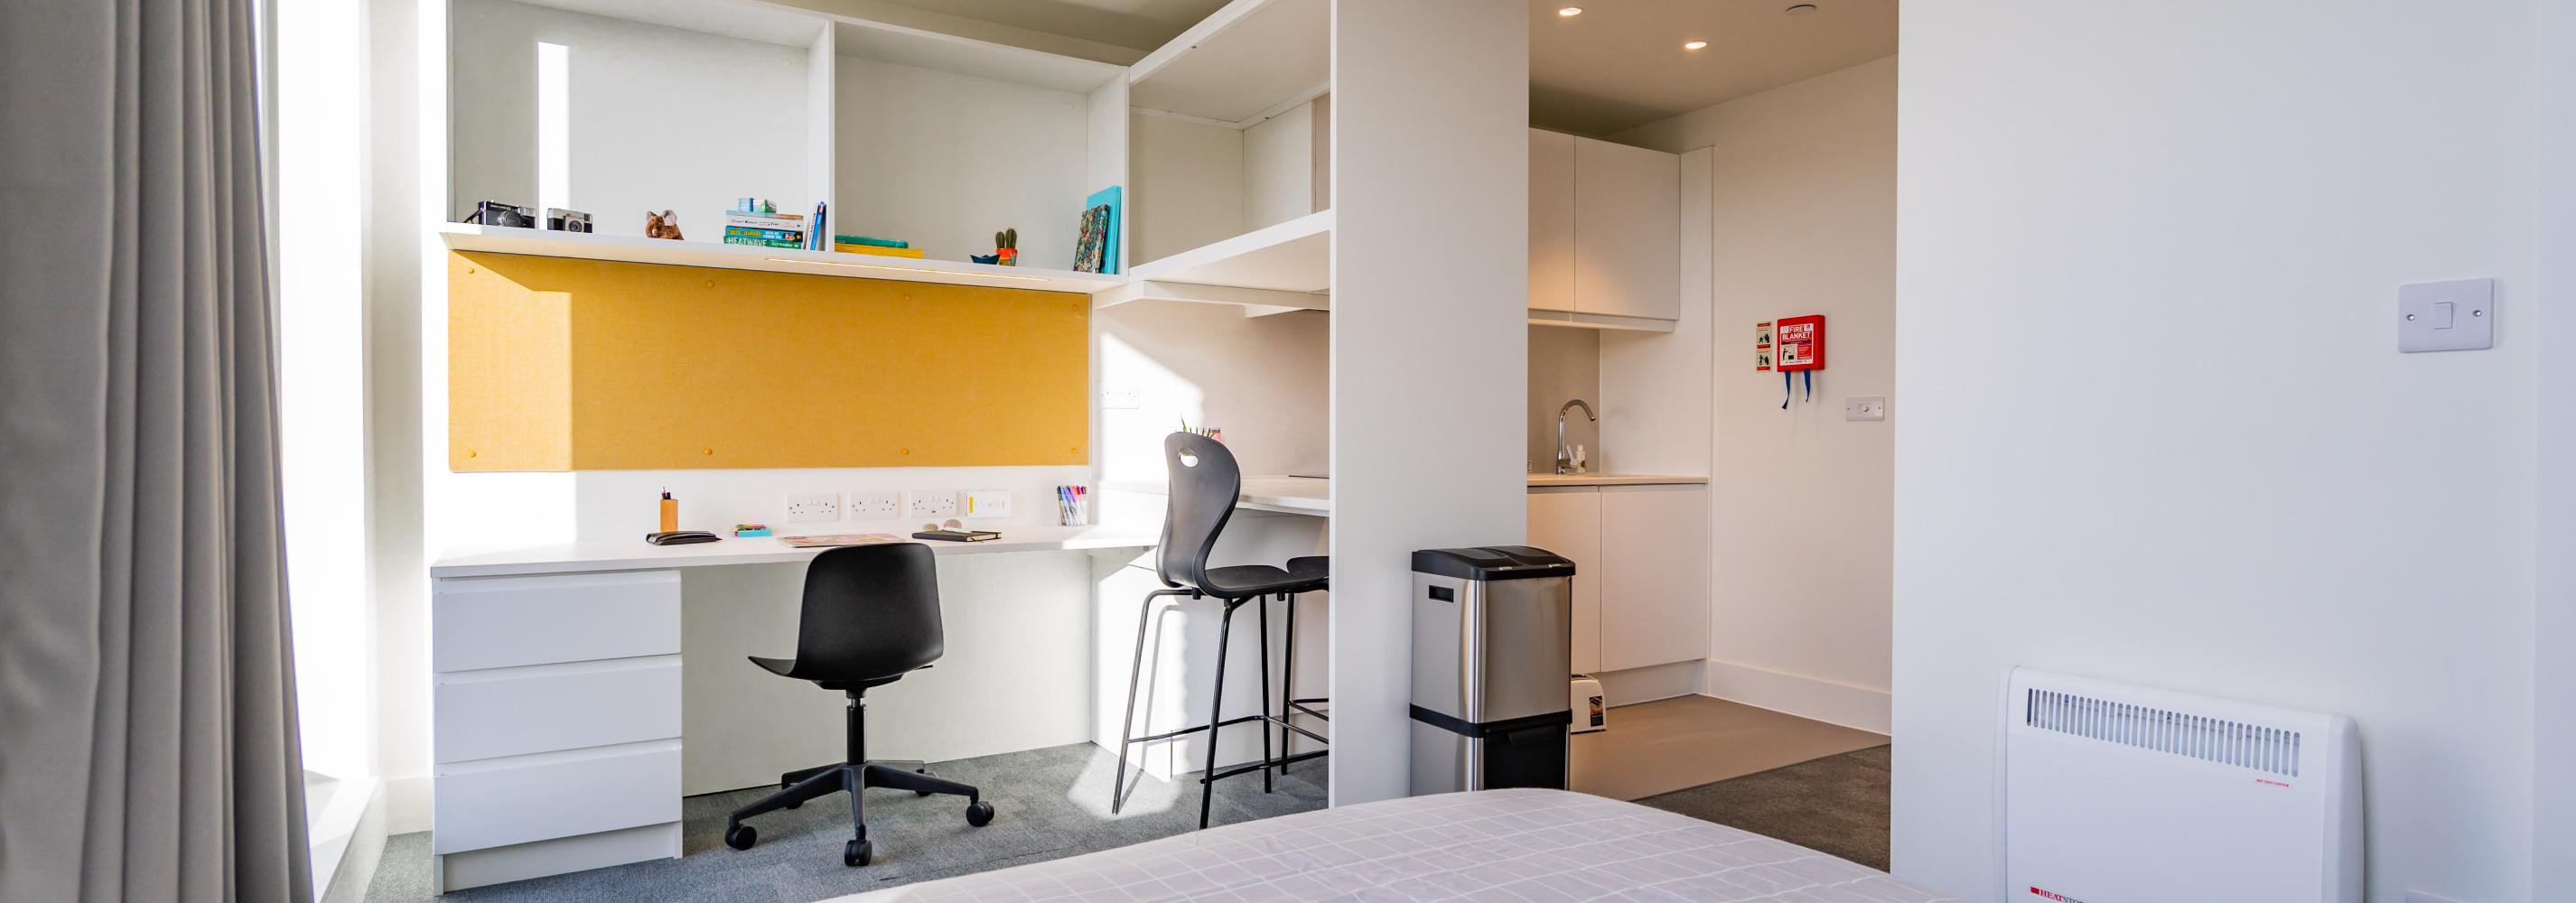 A self contained studio view from the double bed showing the large desk and study area with power and desk chair, the breakfast bar seating with storage shelves above and the small kitchen area.